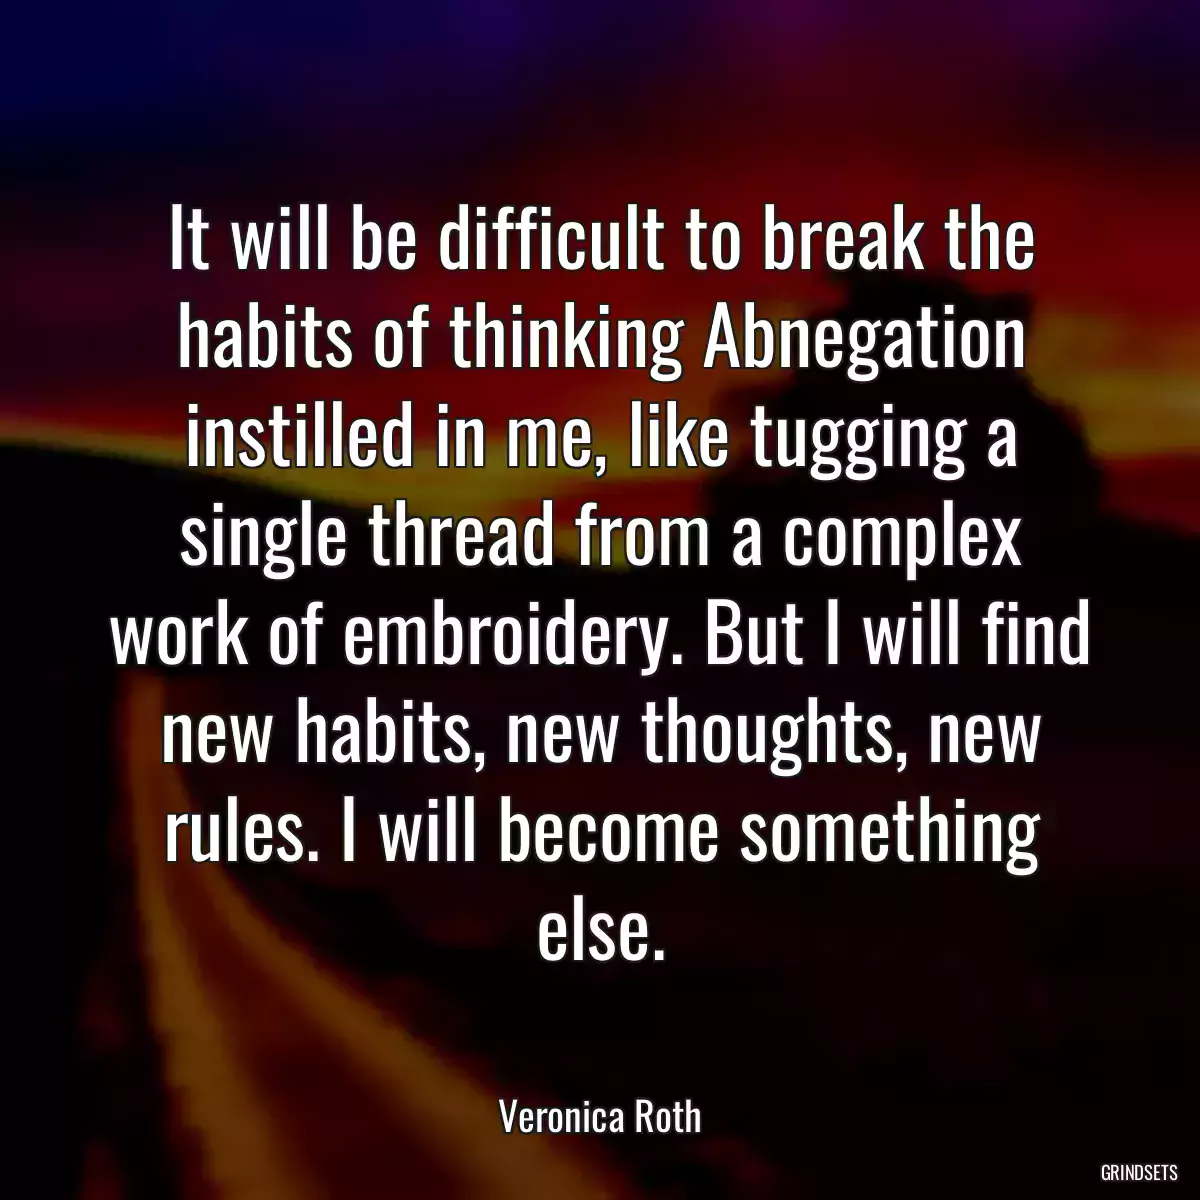 It will be difficult to break the habits of thinking Abnegation instilled in me, like tugging a single thread from a complex work of embroidery. But I will find new habits, new thoughts, new rules. I will become something else.